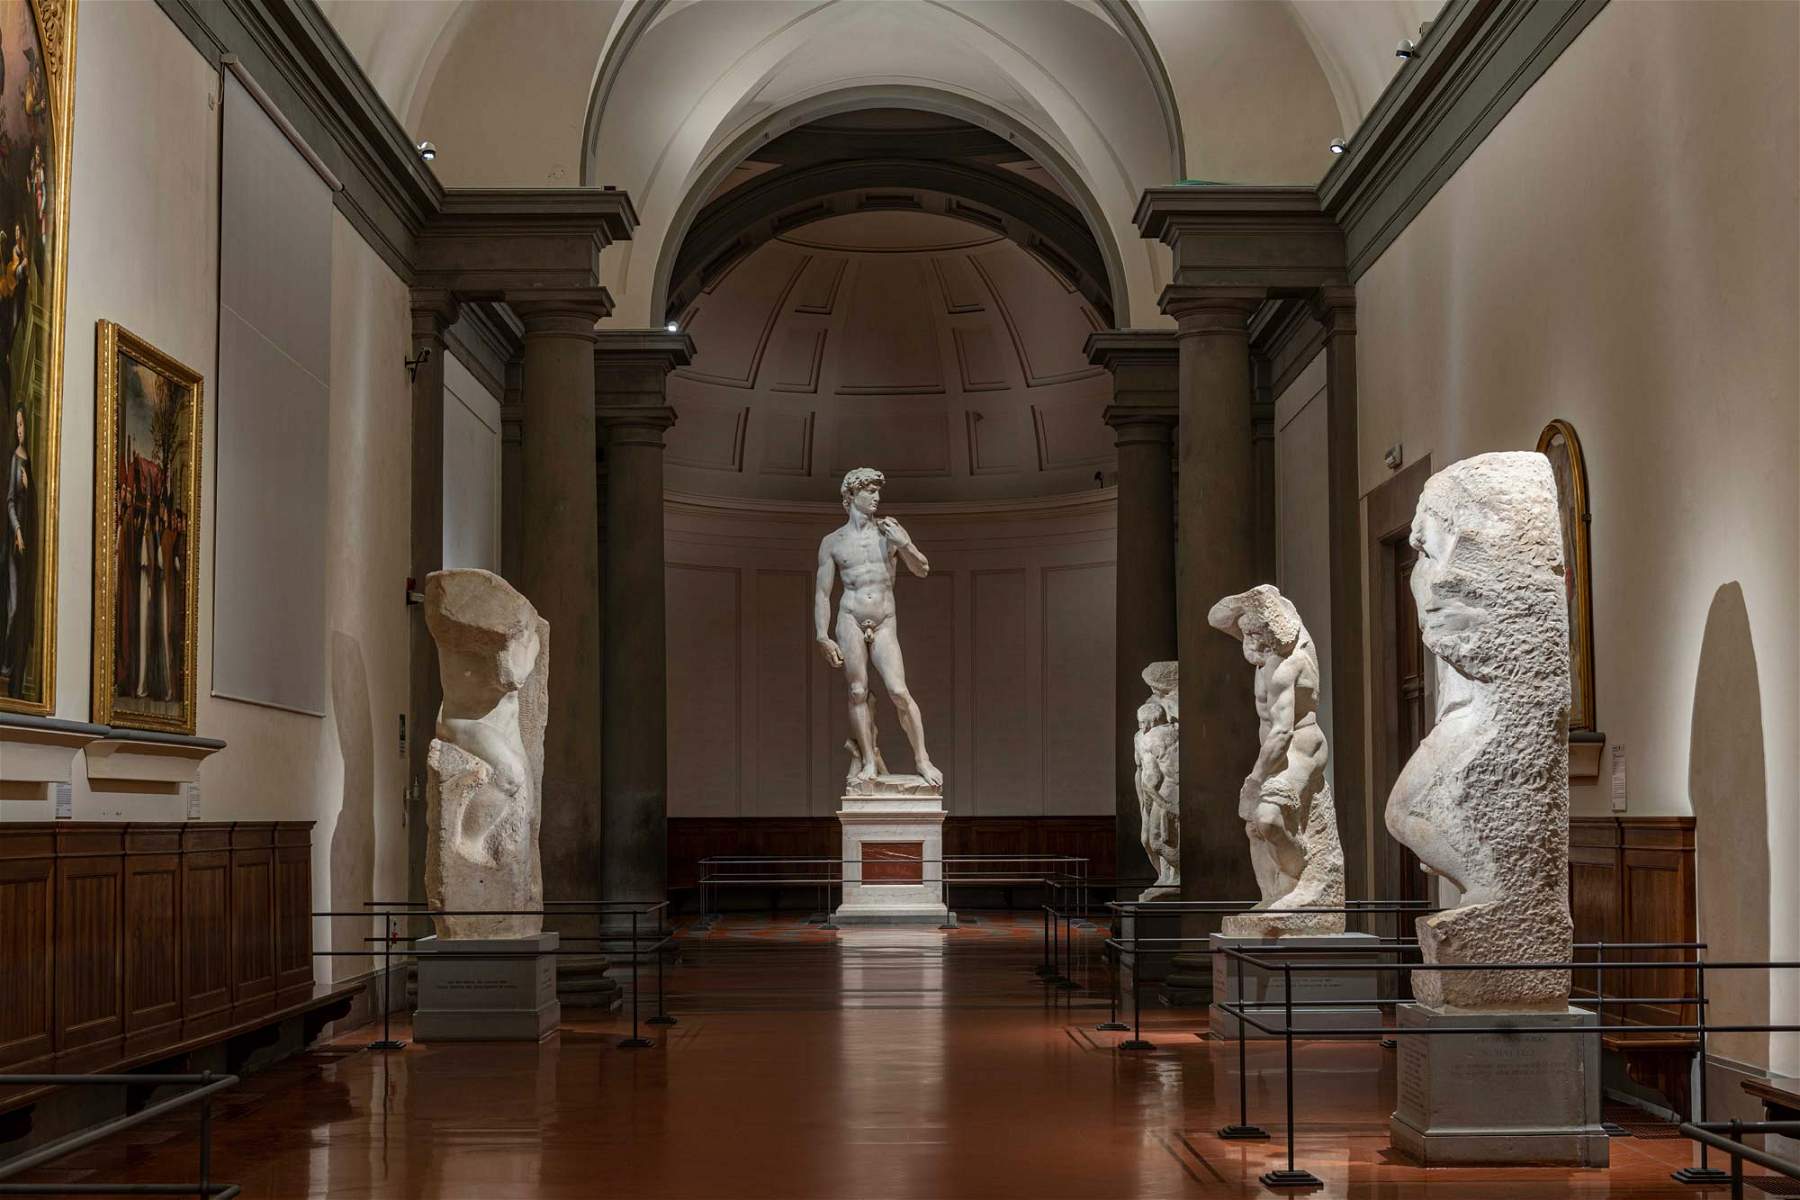 Florence, museum renovation work ends at Accademia Gallery